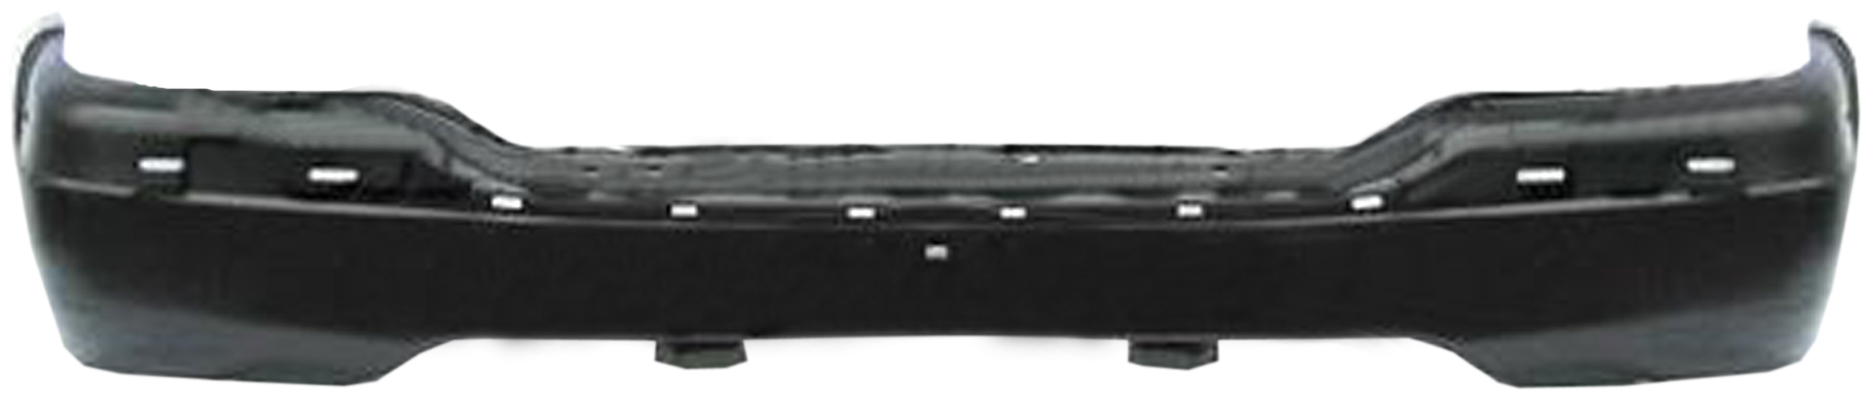 Aftermarket METAL FRONT BUMPERS for CHEVROLET - TAHOE, TAHOE,00-06,Front bumper face bar